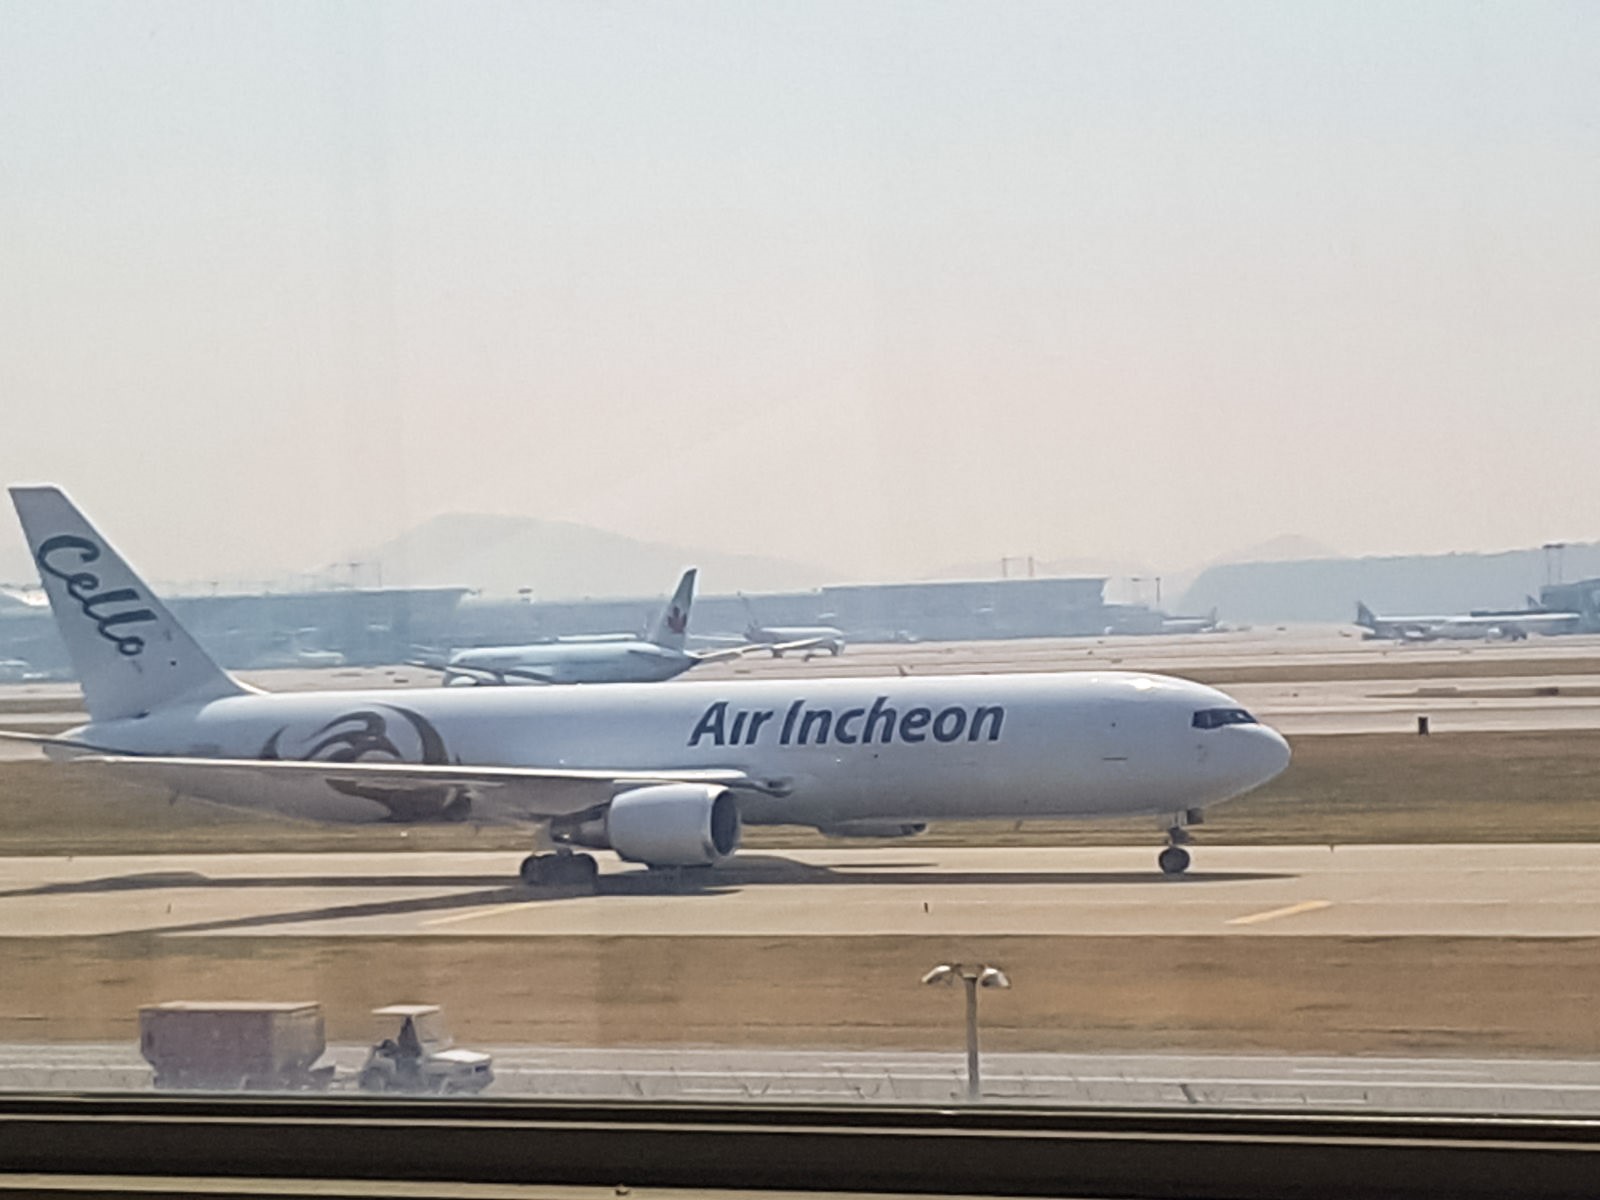 Air Incheon's first 767-300F, on-lease from ATSG West.